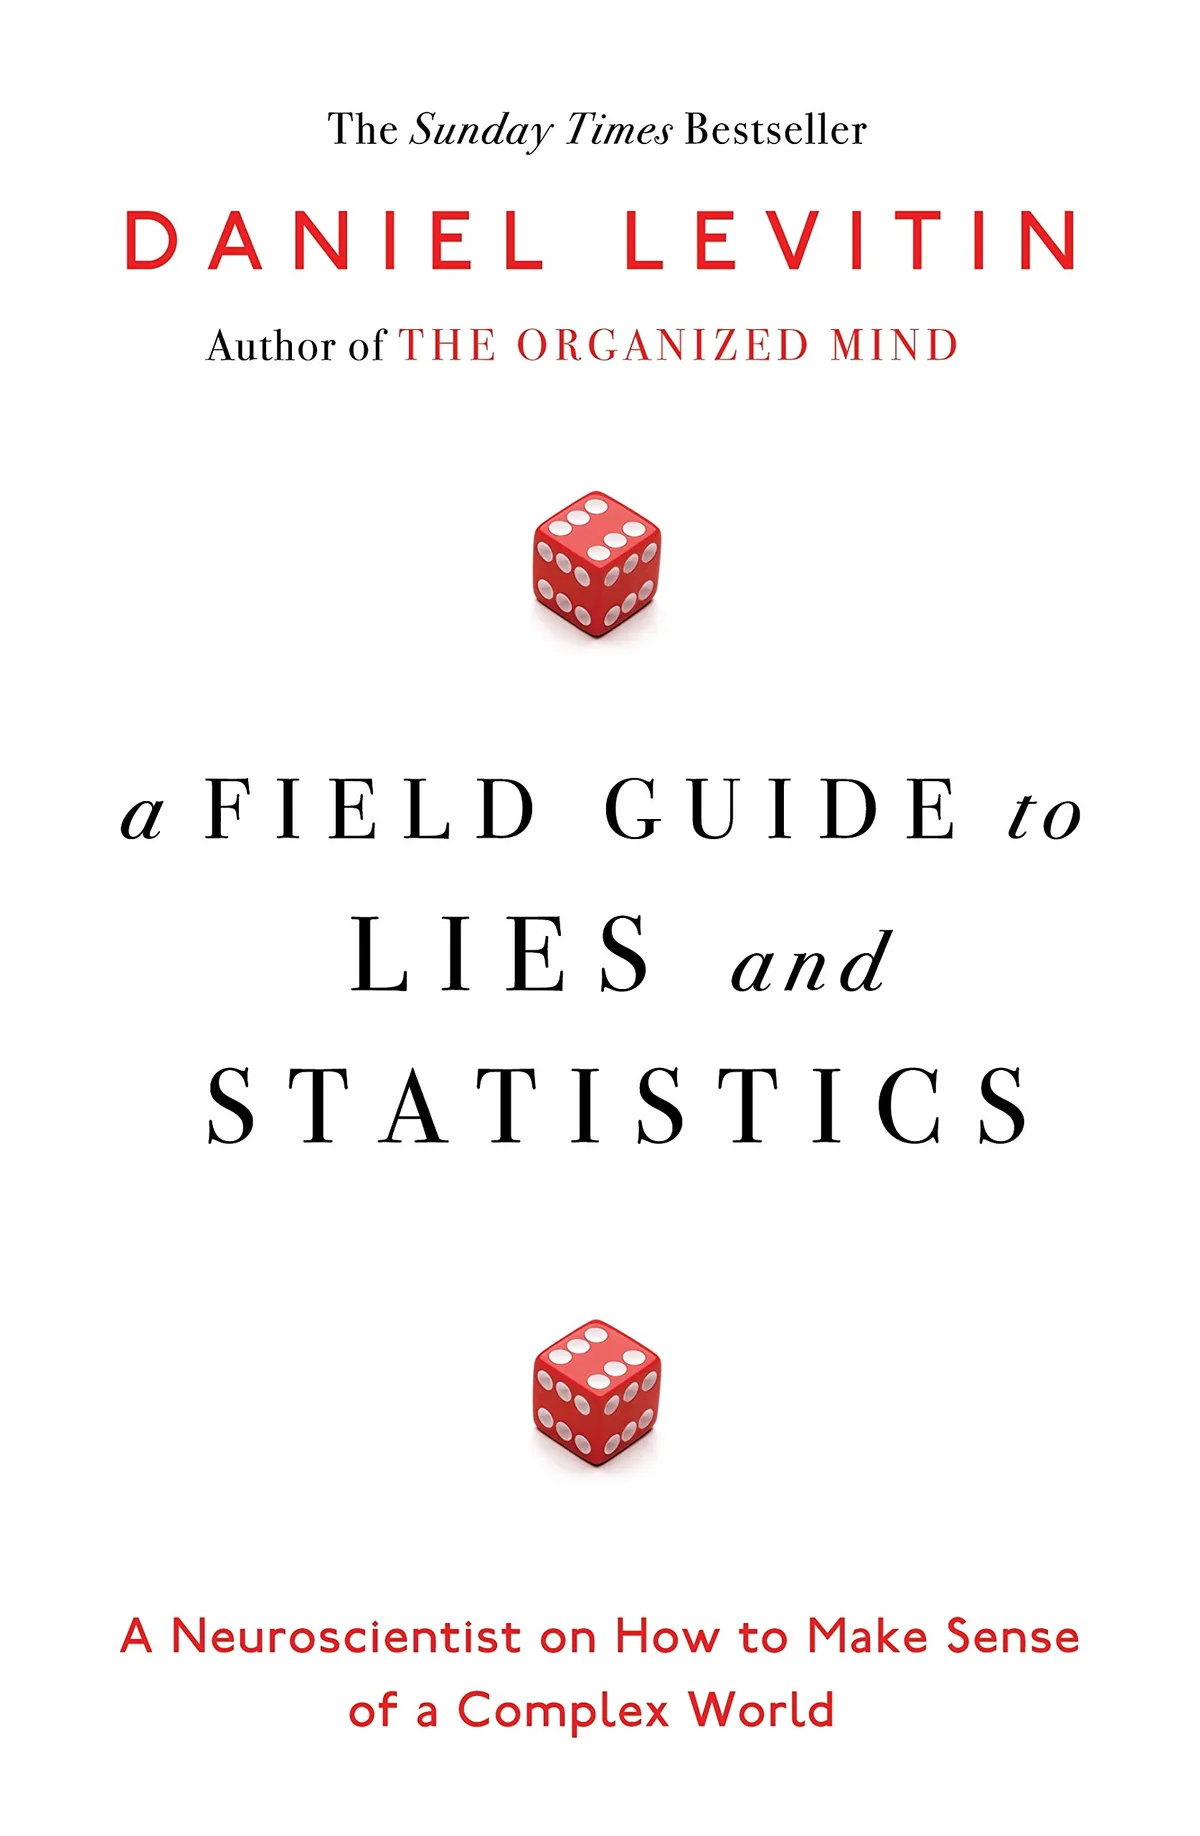 A Field Guide to Lies and Statistics by Daniel Levitin is out on 26 January (Viking, £14.99)